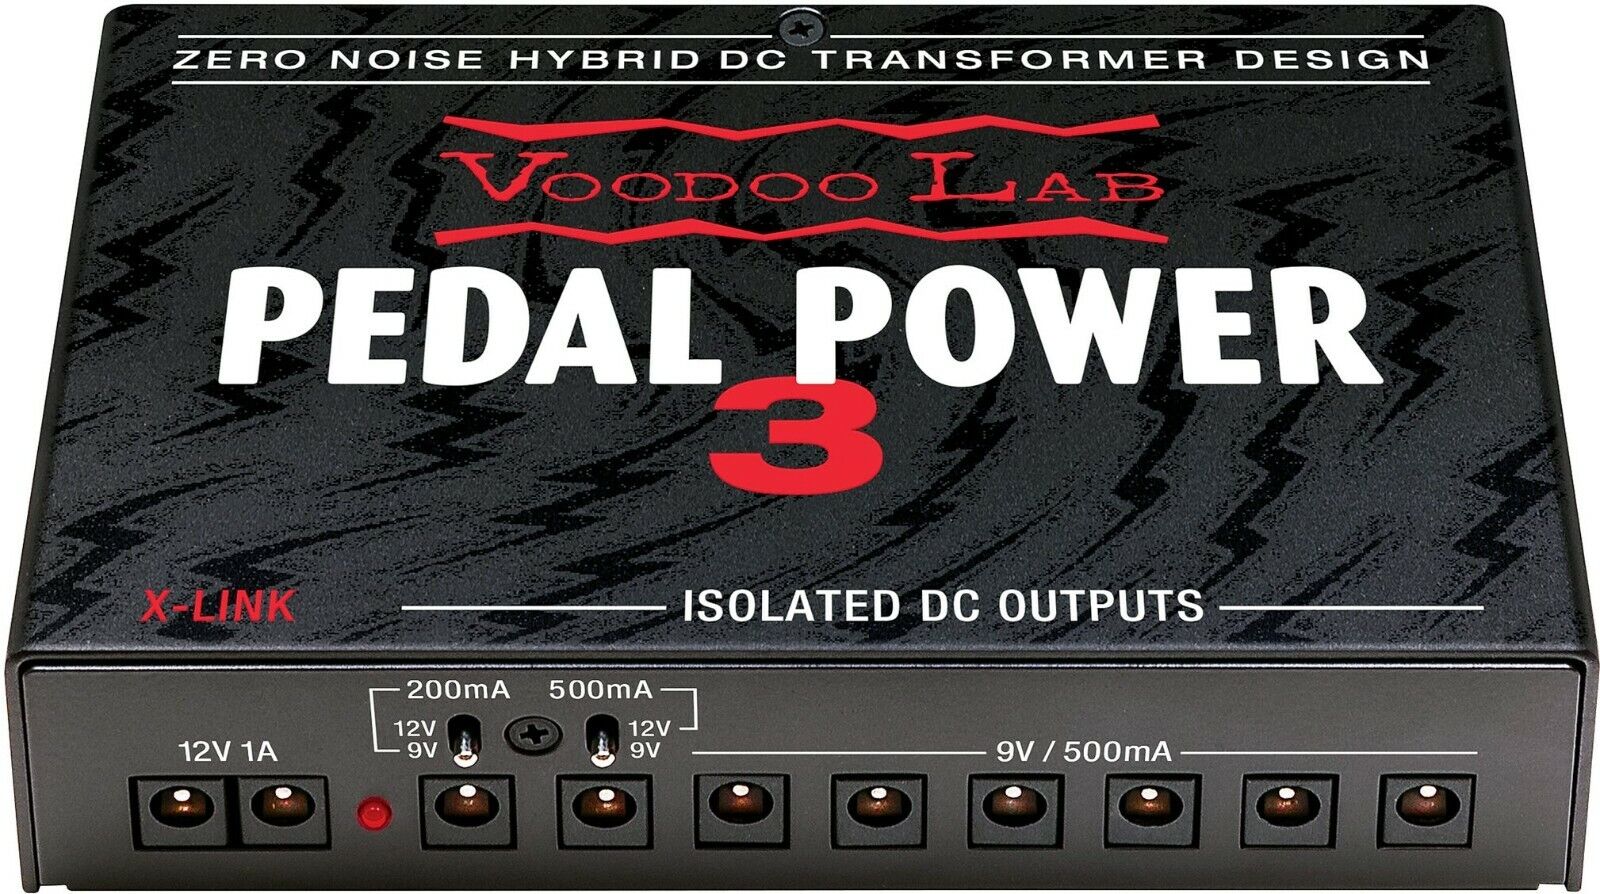 Used Voodoo Lab Pedal Power 3 Guitar Effects Pedalboard Power Supply